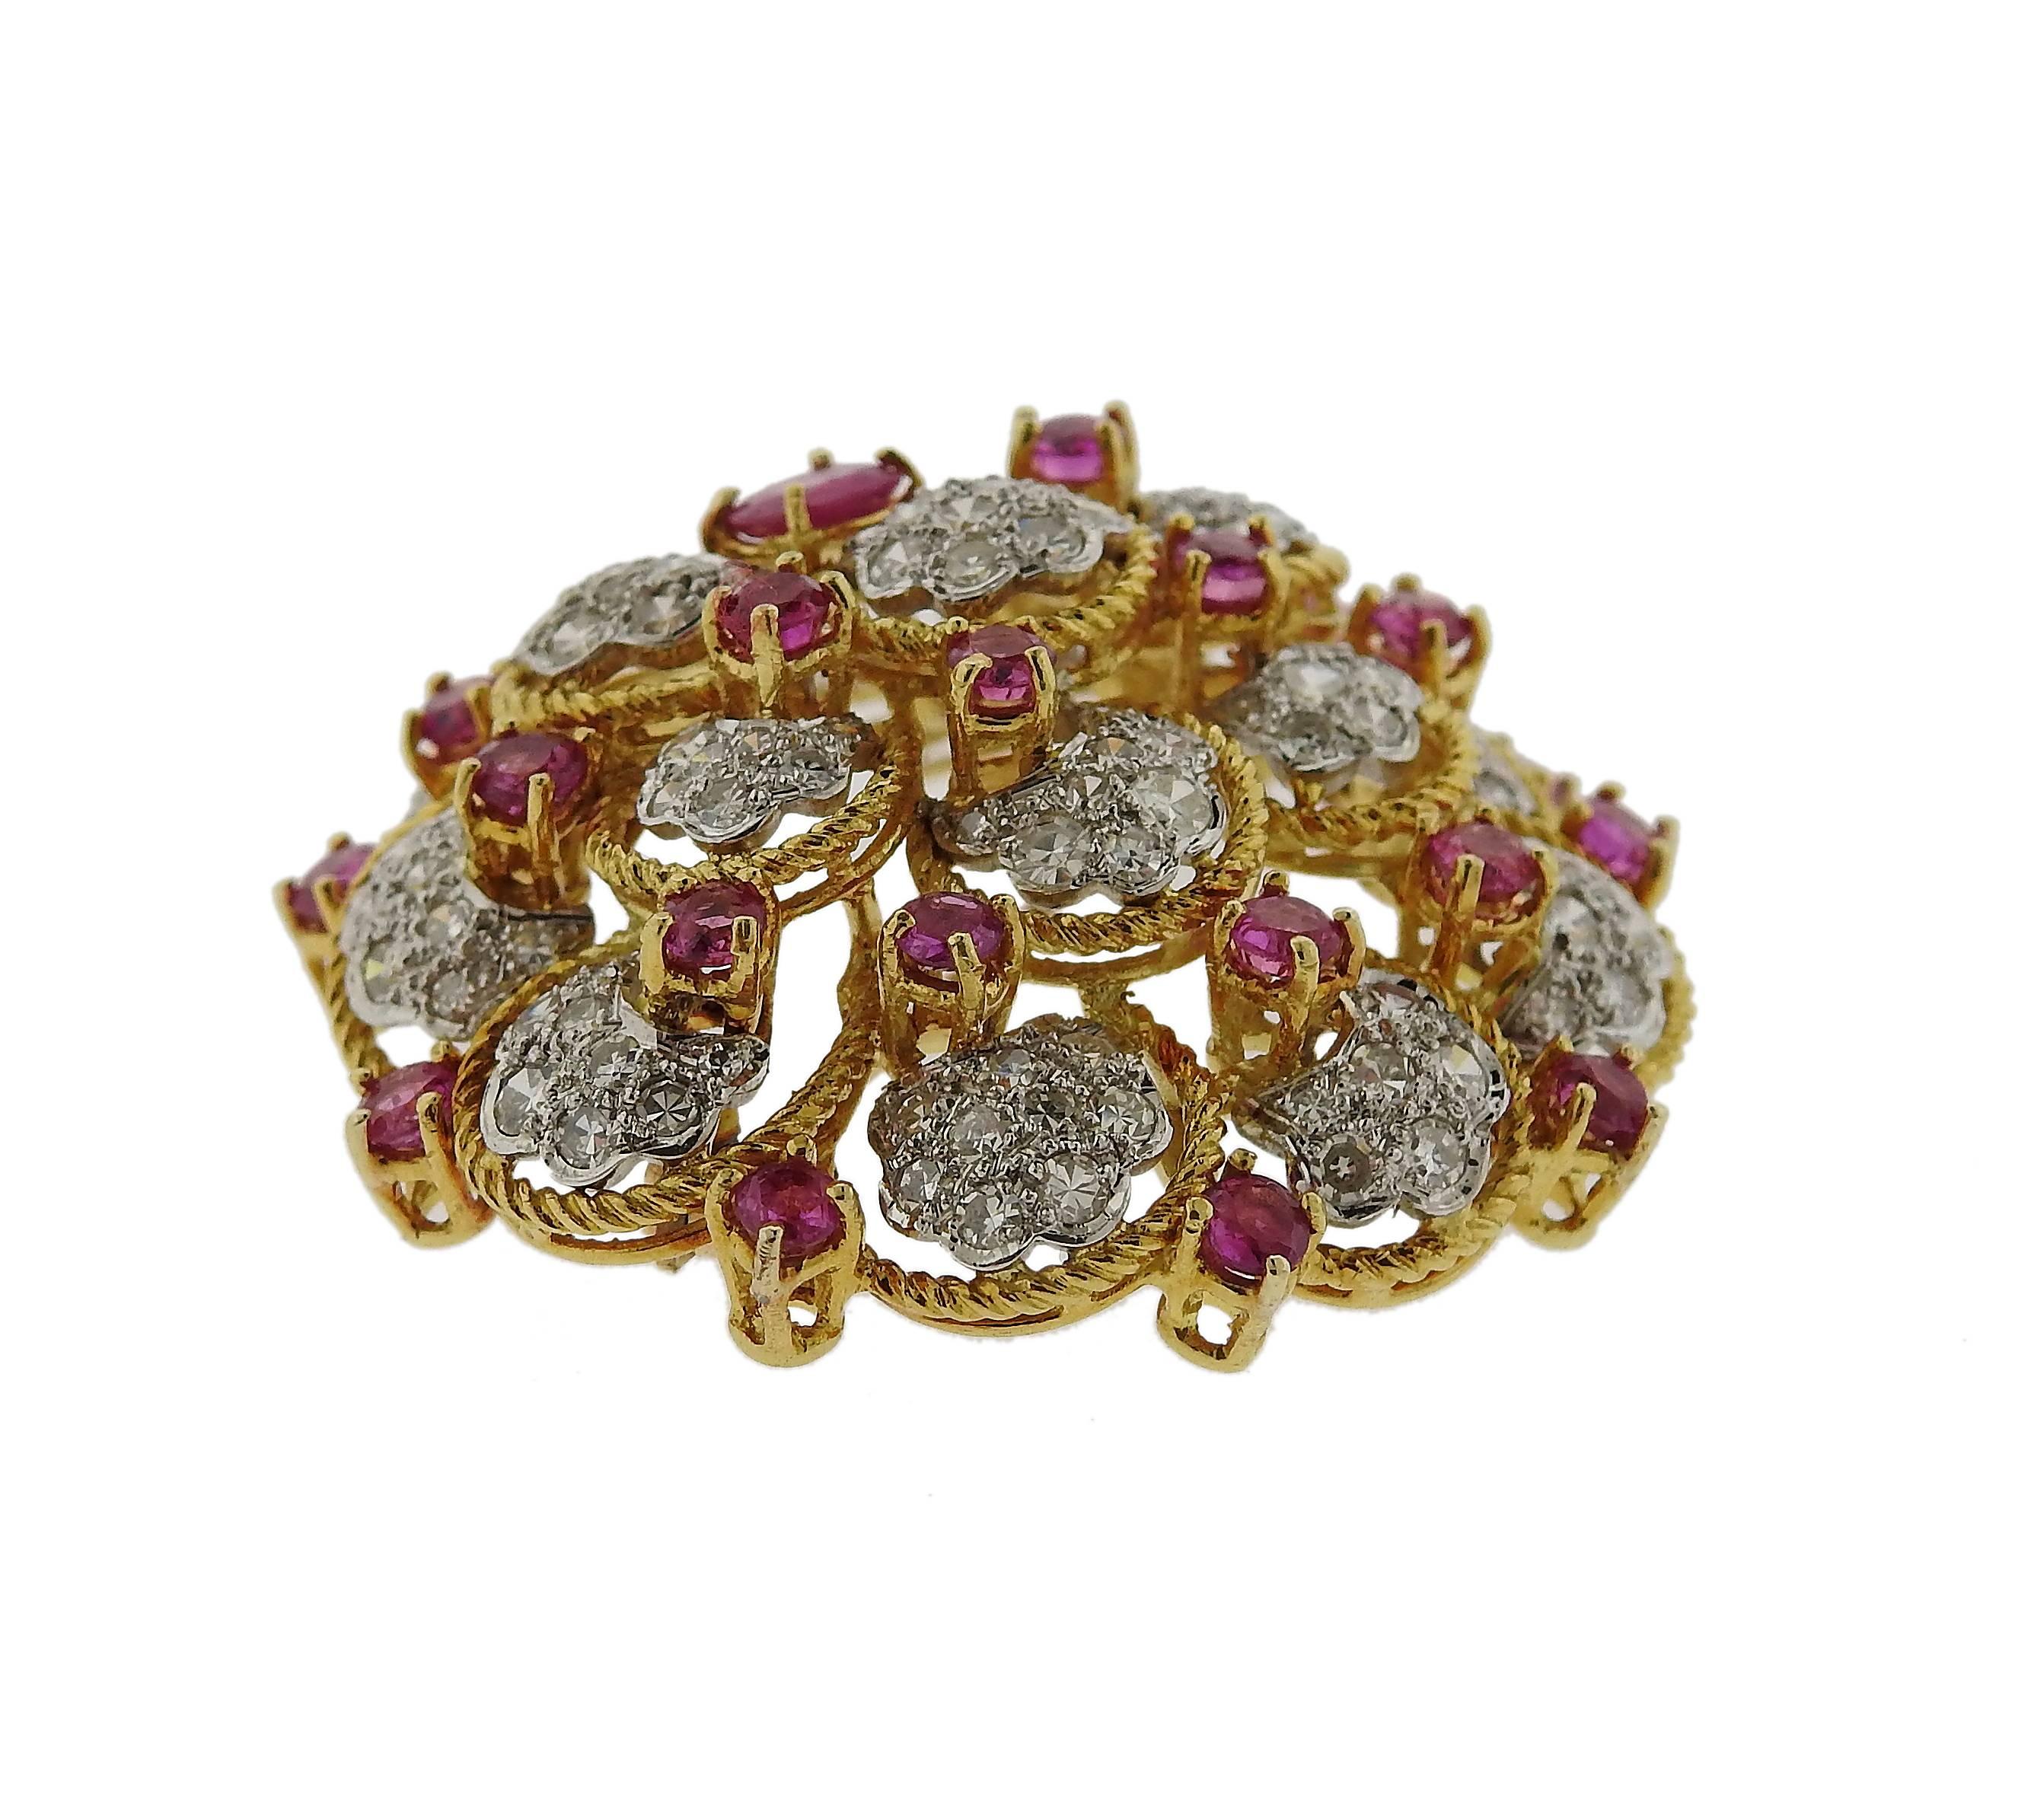 Circa 1960s 18k gold brooch pin, crafted by Orletto, decorated with rubies and approximately 2.60ctw in diamonds. Brooch is 38mm x 41mm and weighs 20.1 grams. Marked: Italy, Orletto, 18k.